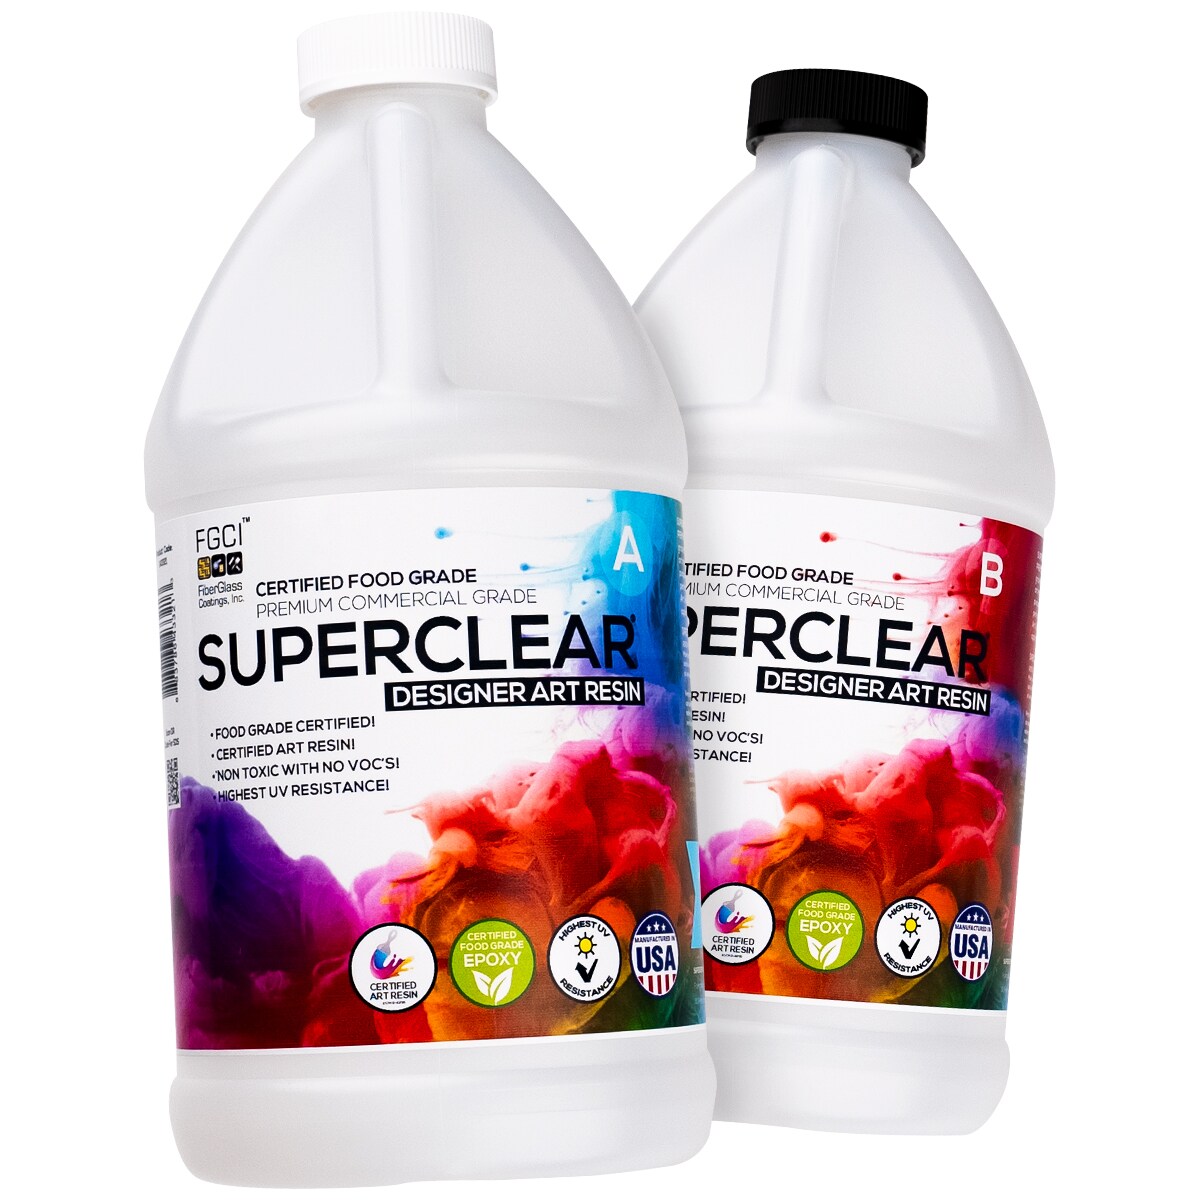 Superclear&#xAE; Designer Art Resin - Clear 2-part Epoxy Resin and Hardener for Jewelry, Charcuterie Boards, Castings and more!